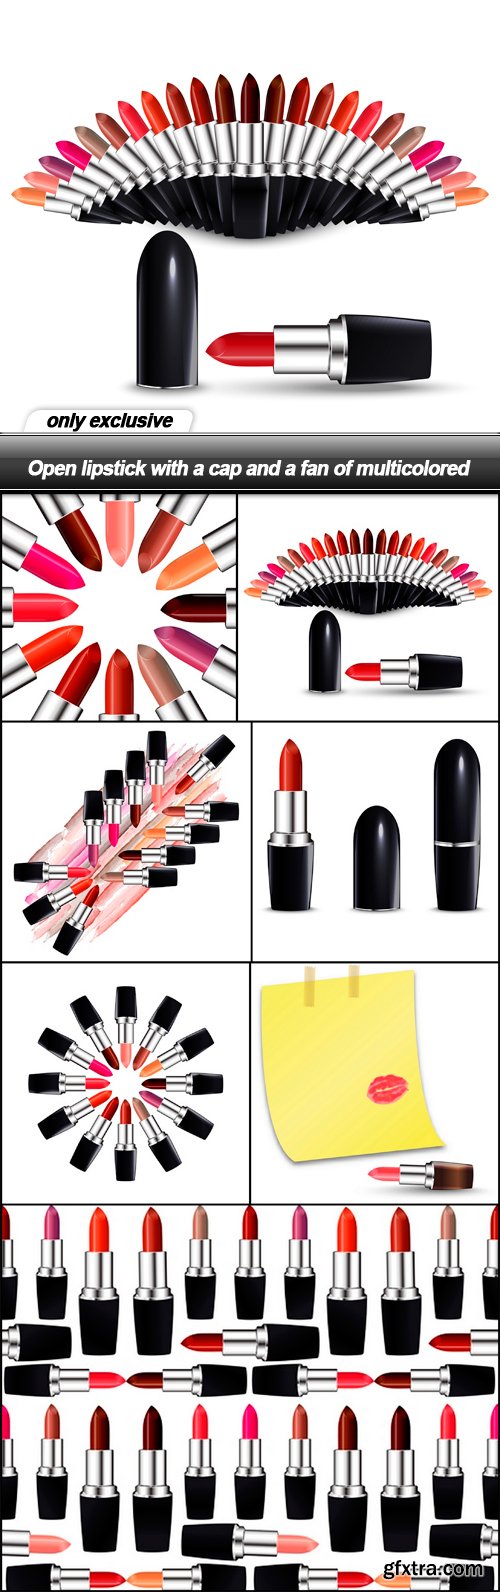 Open lipstick with a cap and a fan of multicolored - 7 EPS